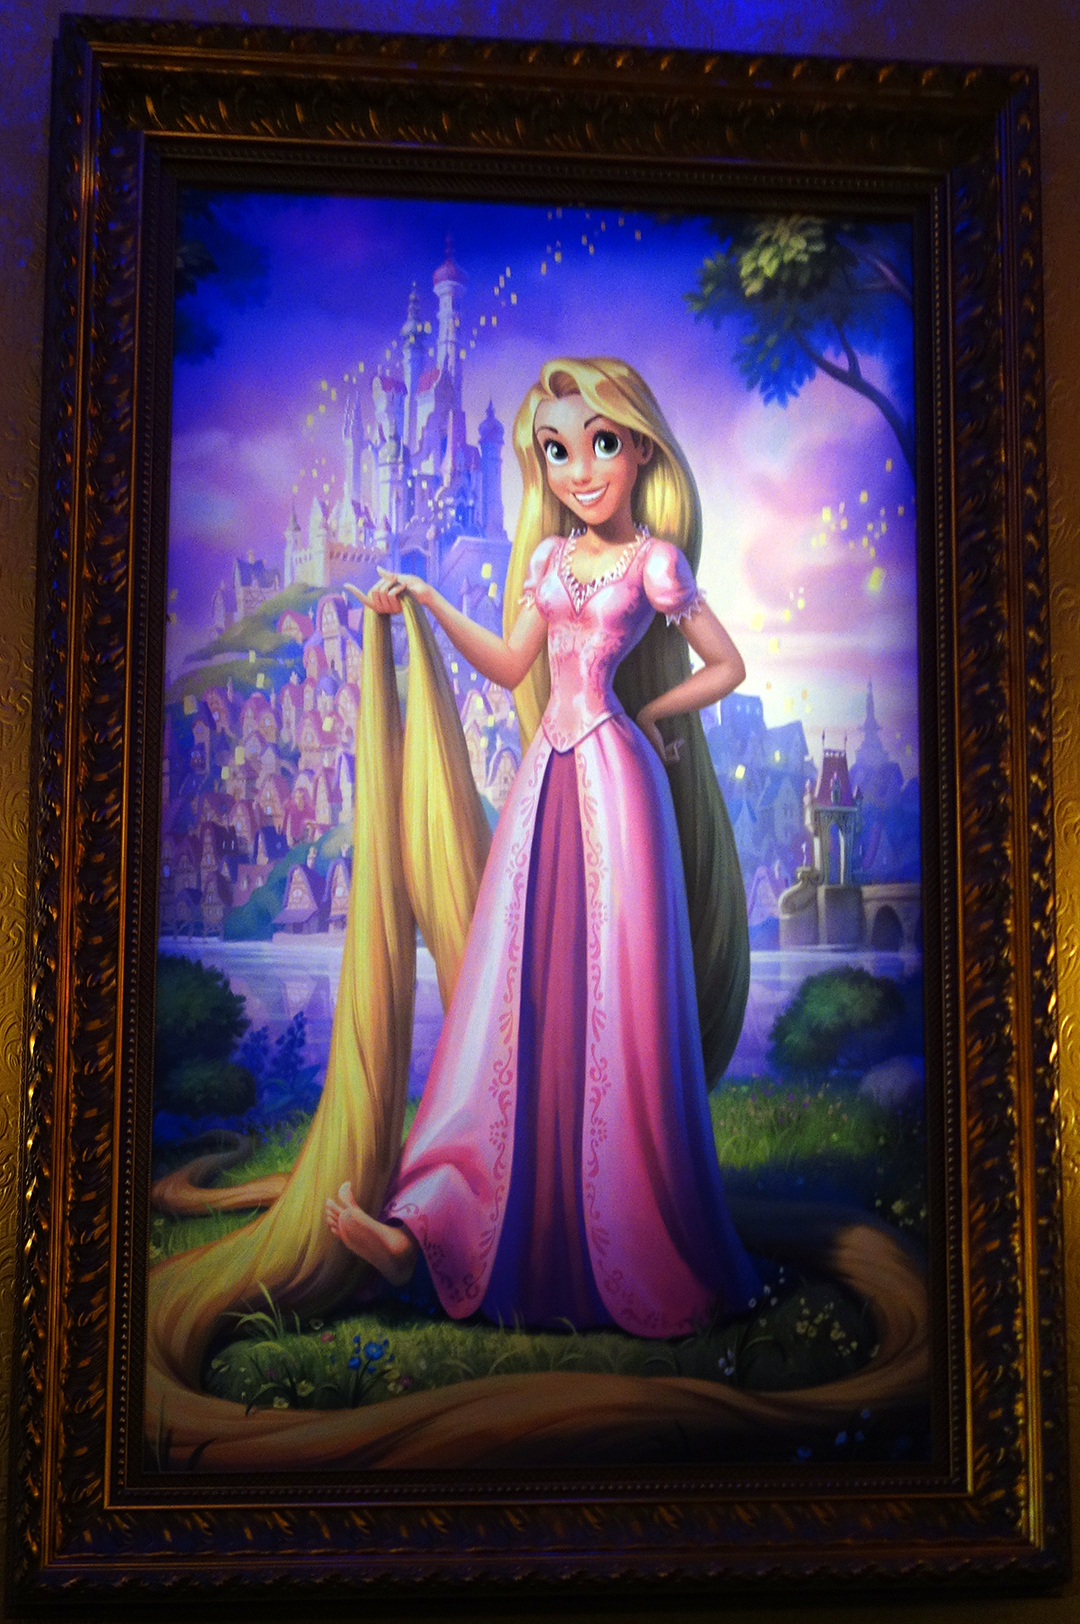 You can find Rapunzel here every day